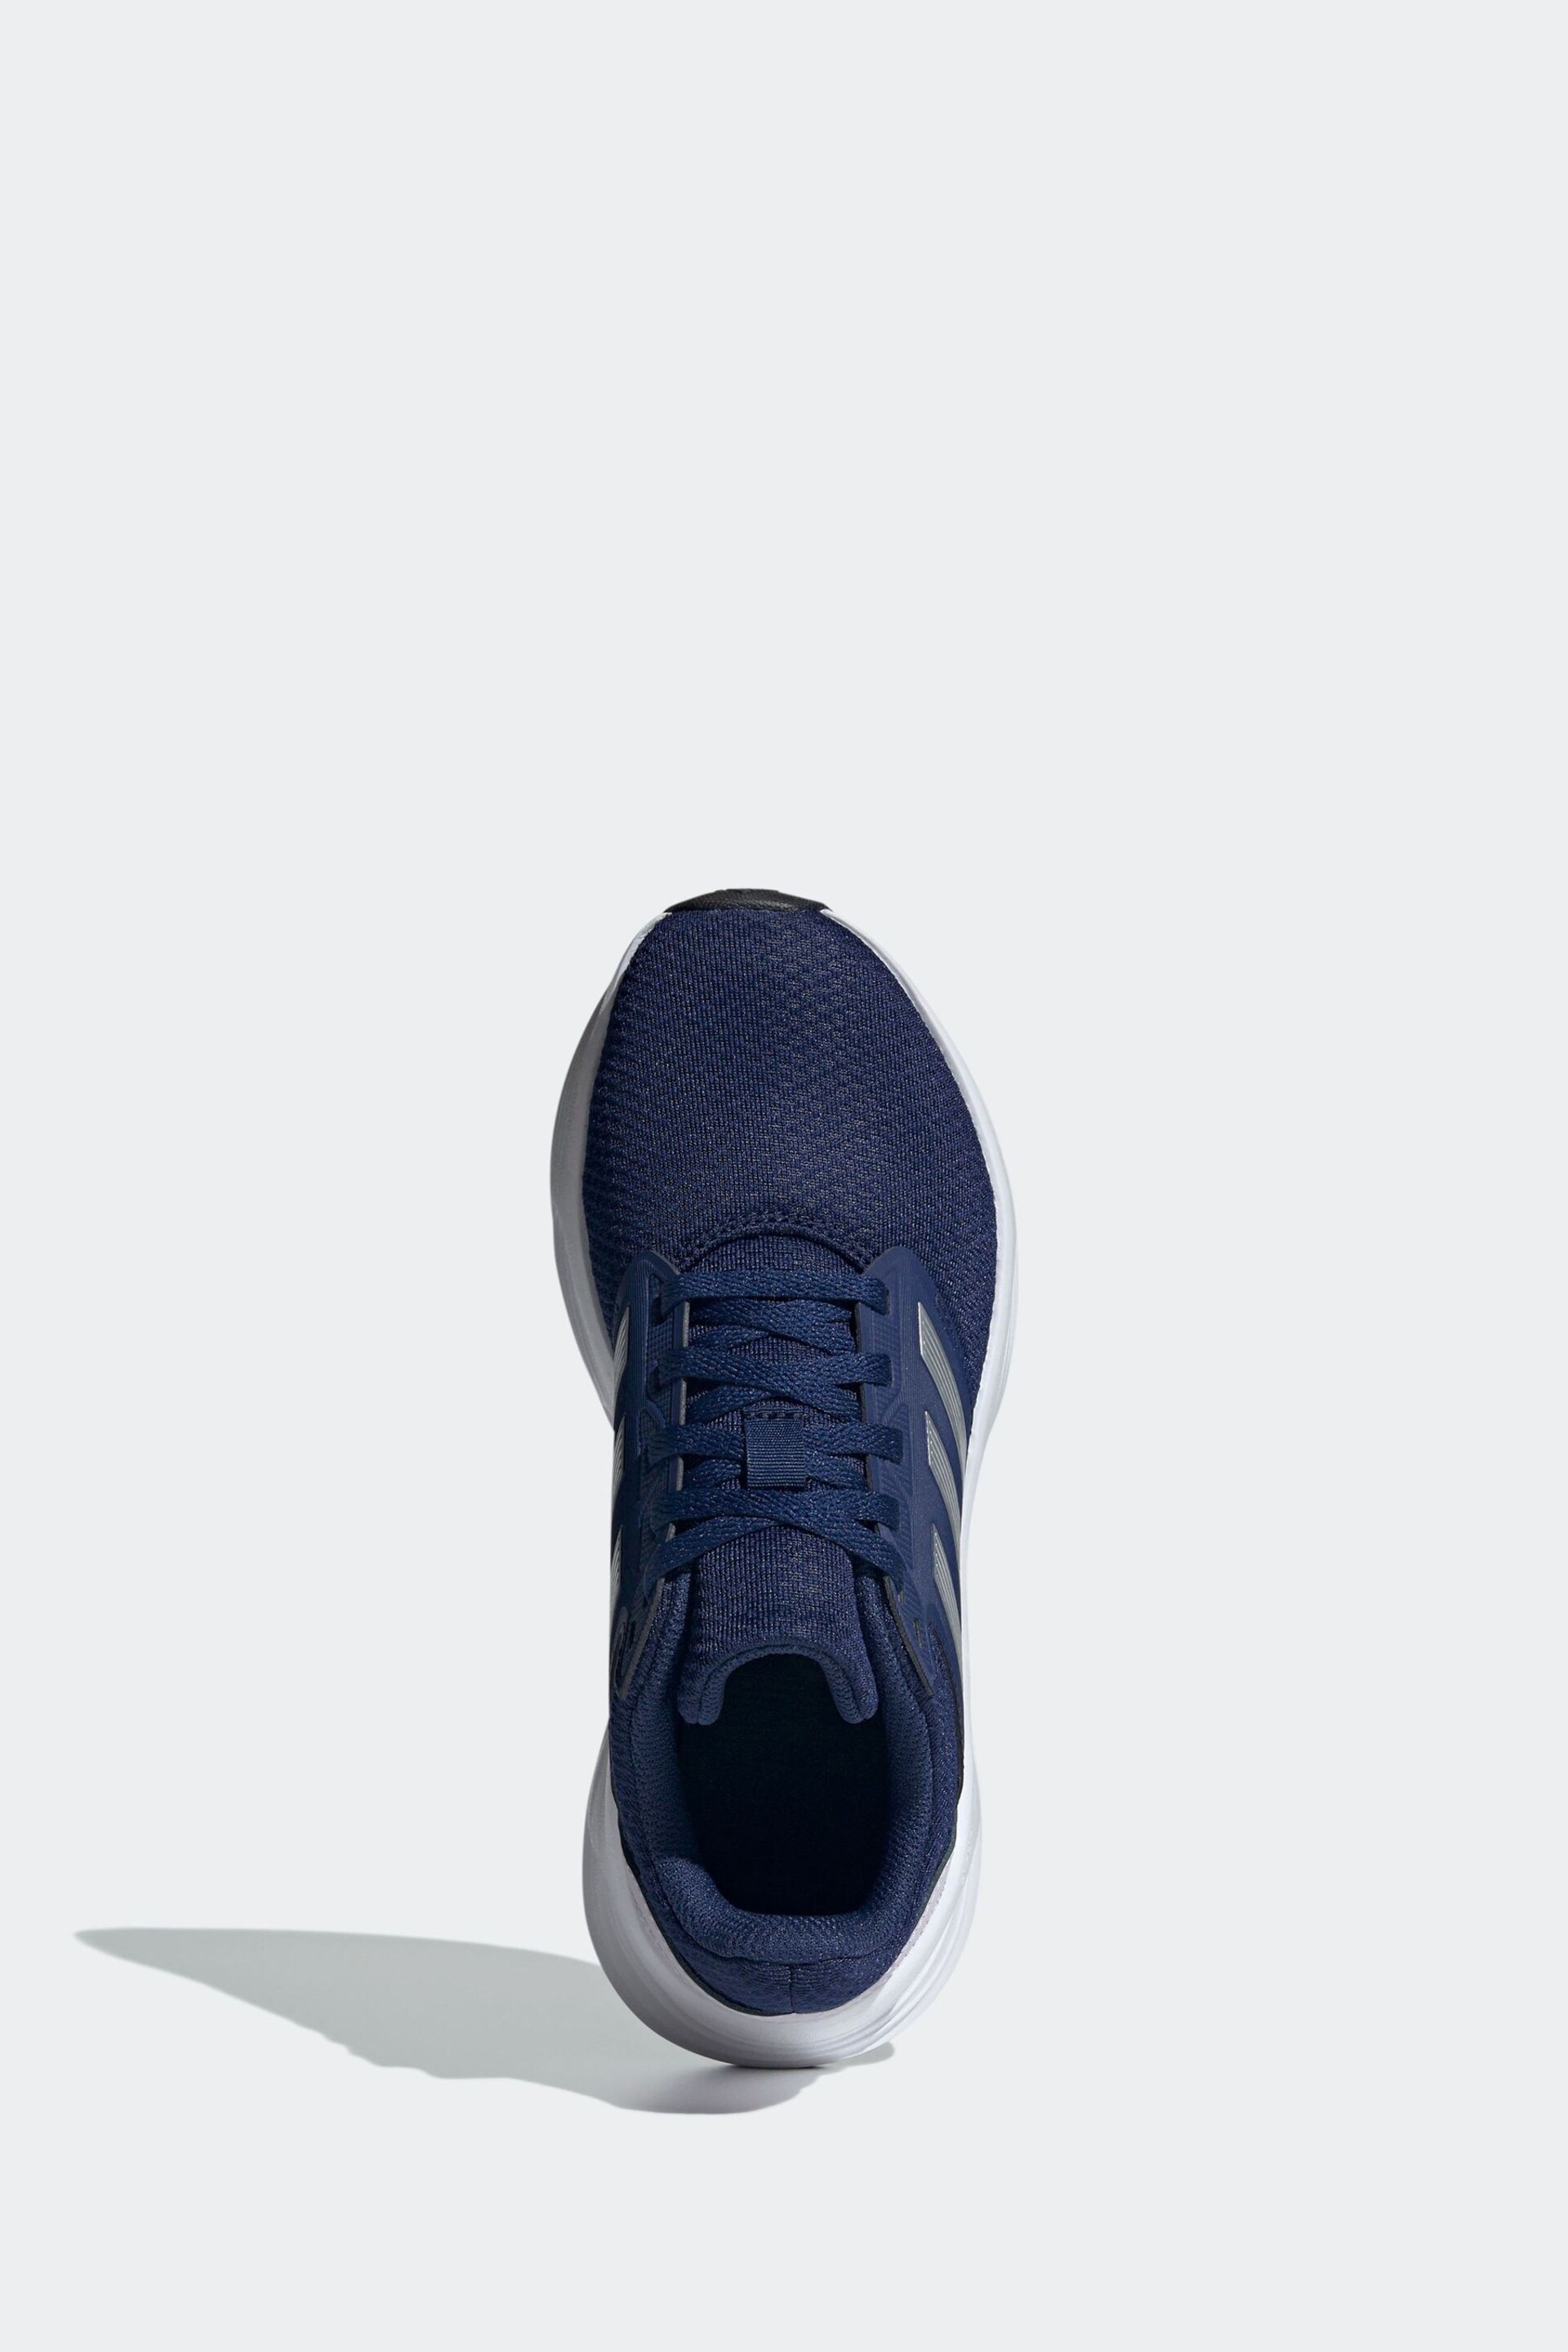 adidas Blue Galaxy 6 Trainers - Image 5 of 8